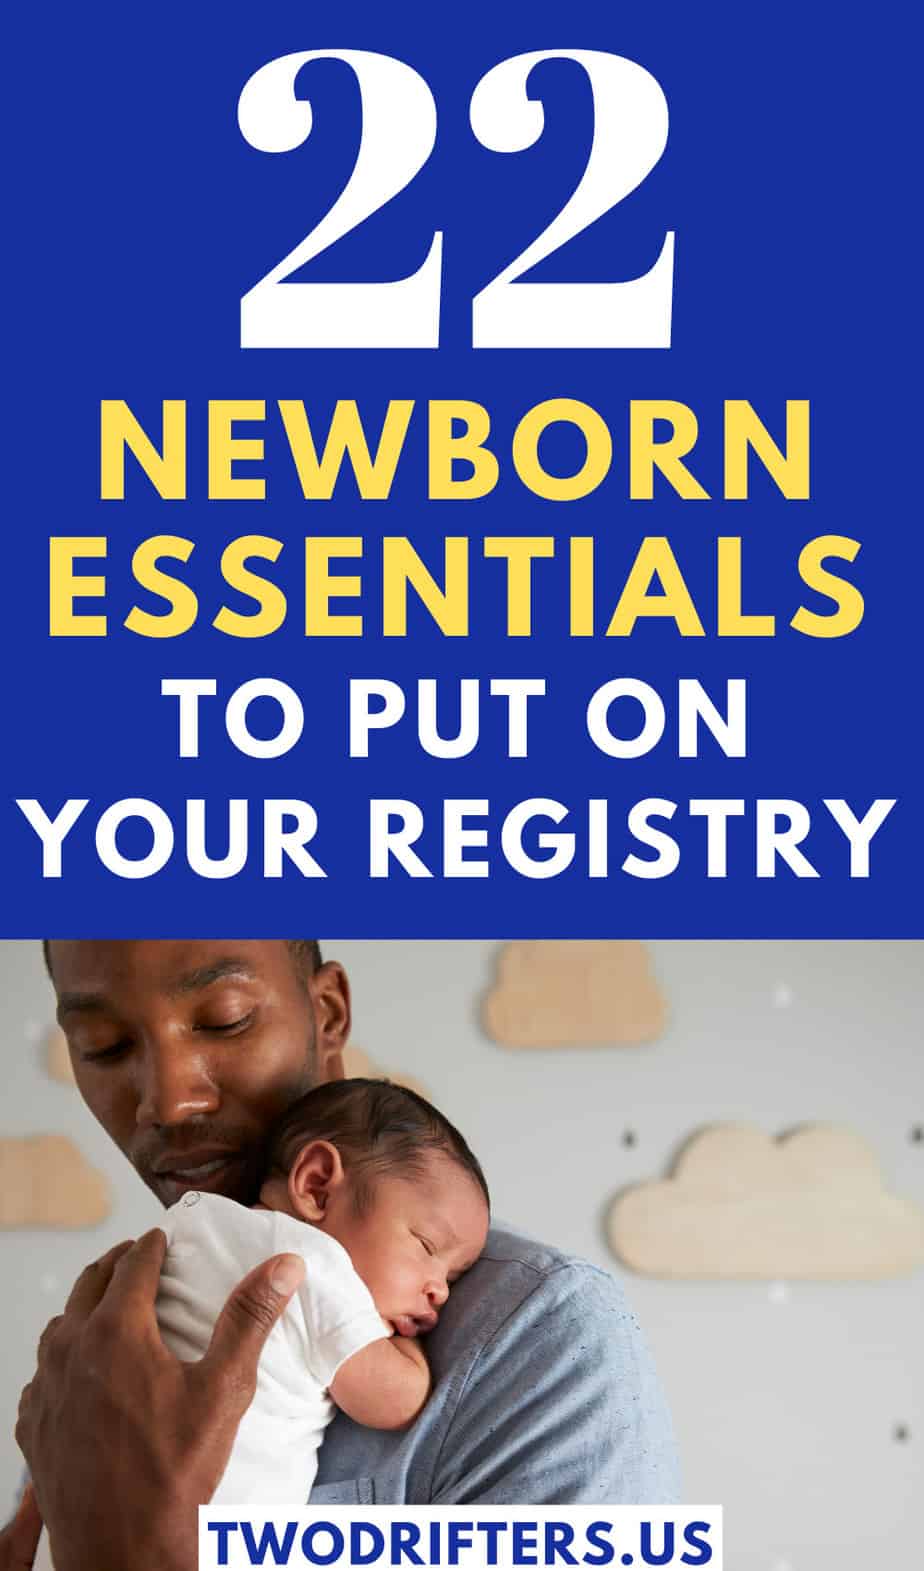 Pinterest social image that says “22 newborn essentials to put on your registry.”